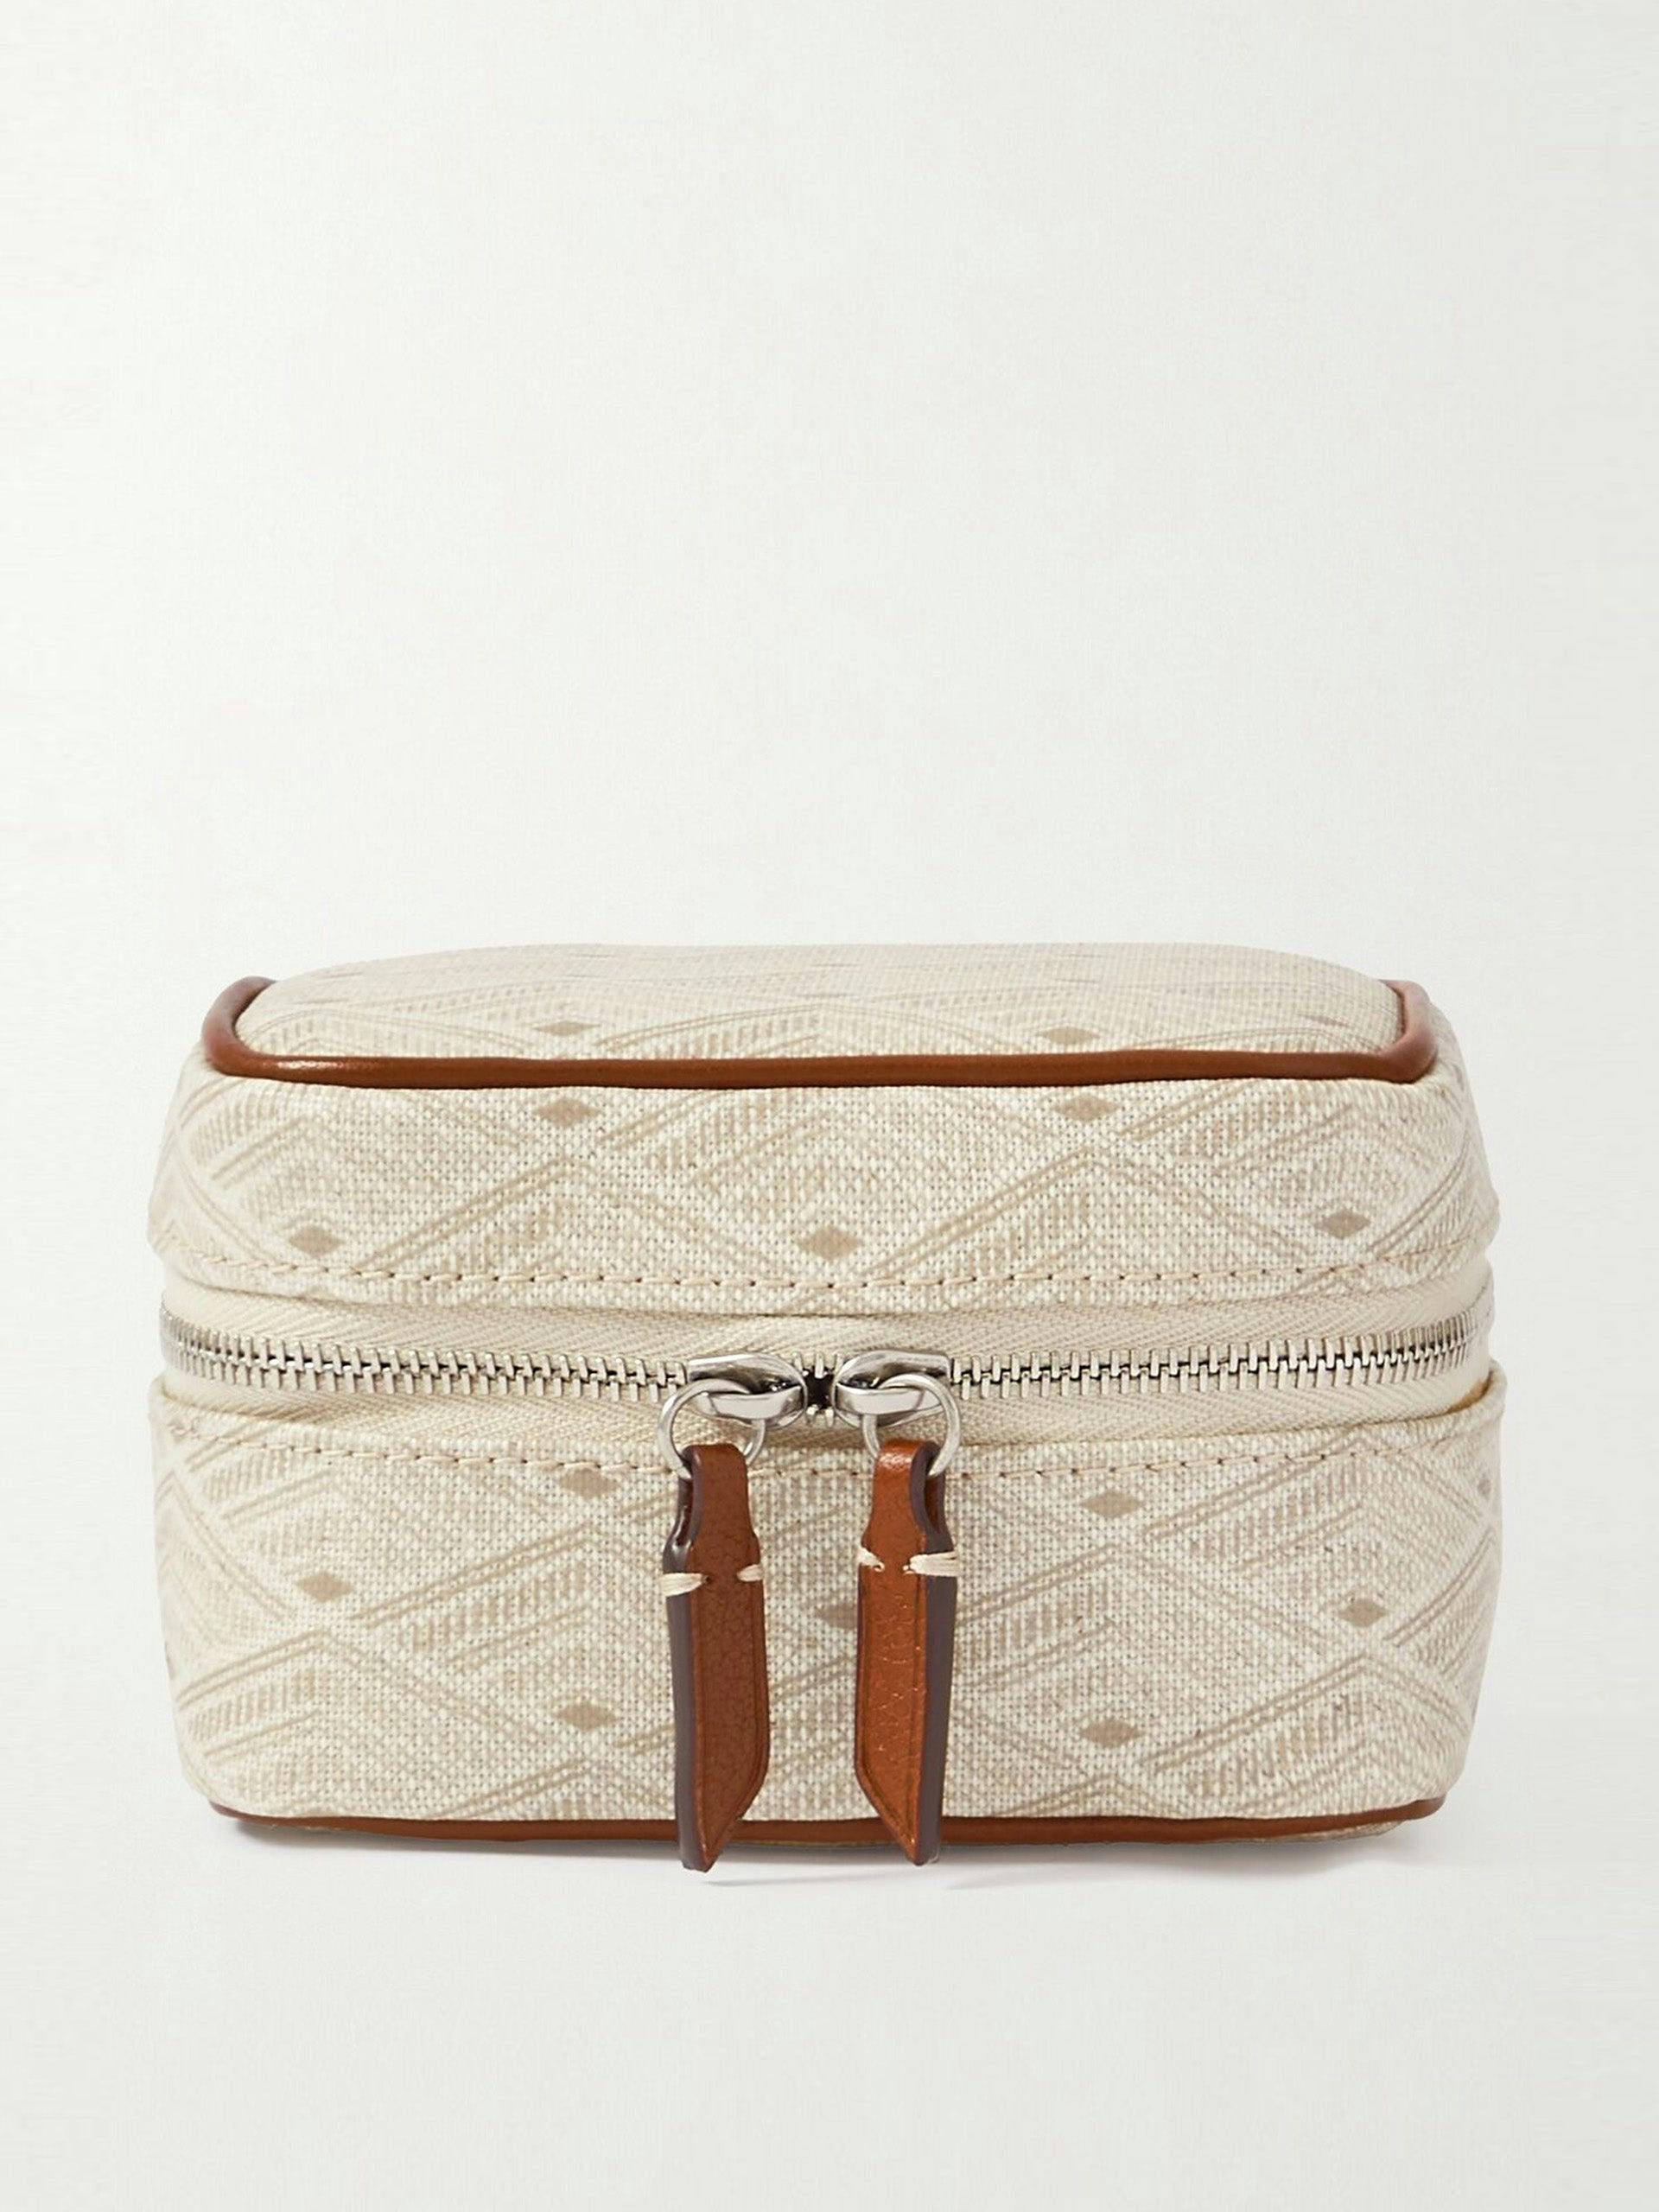 Leather-trimmed printed canvas travel case